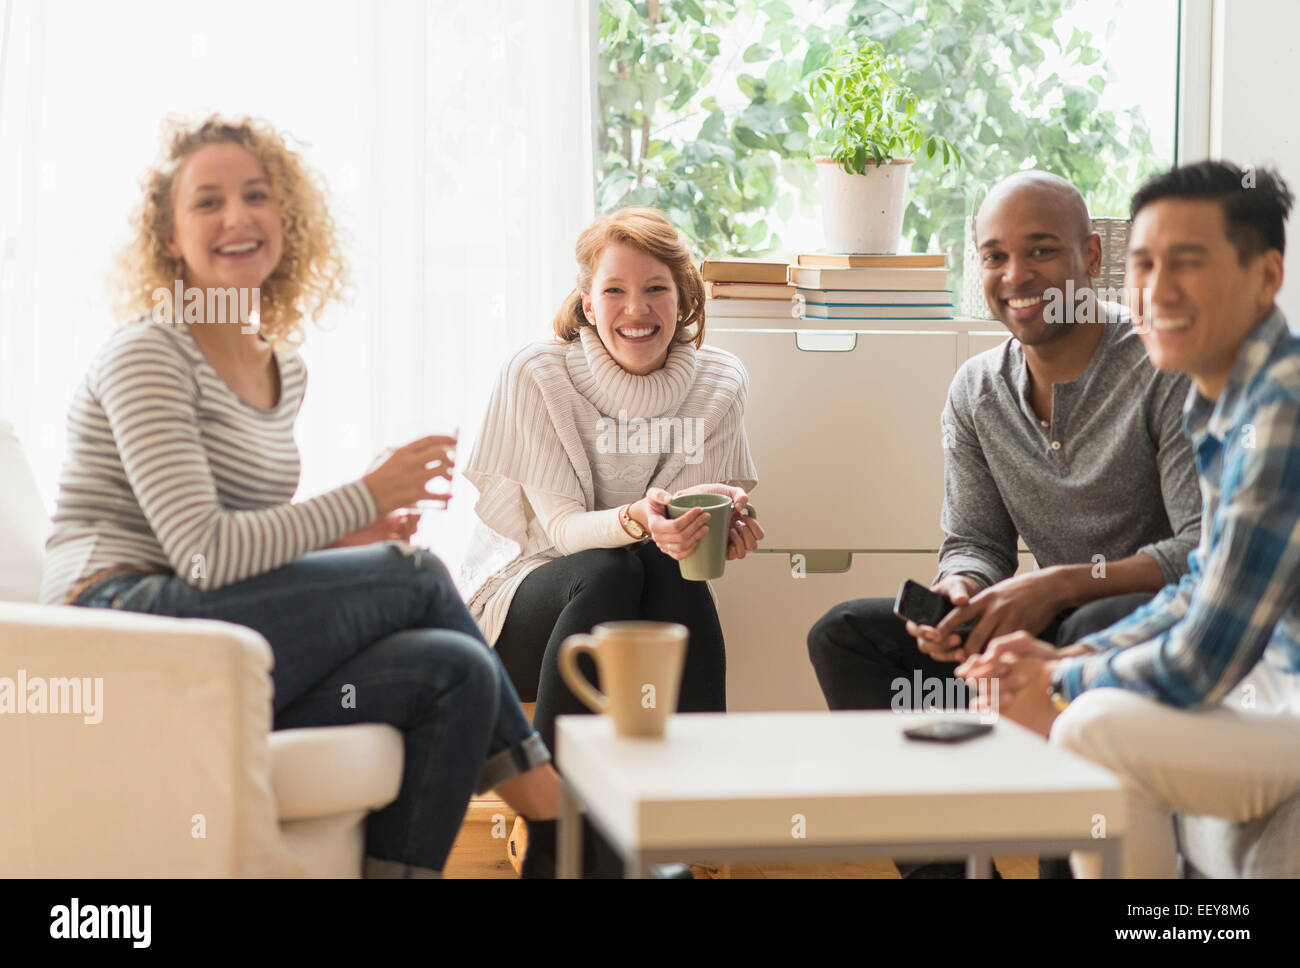 Group of friends hanging out in living room Stock Photo